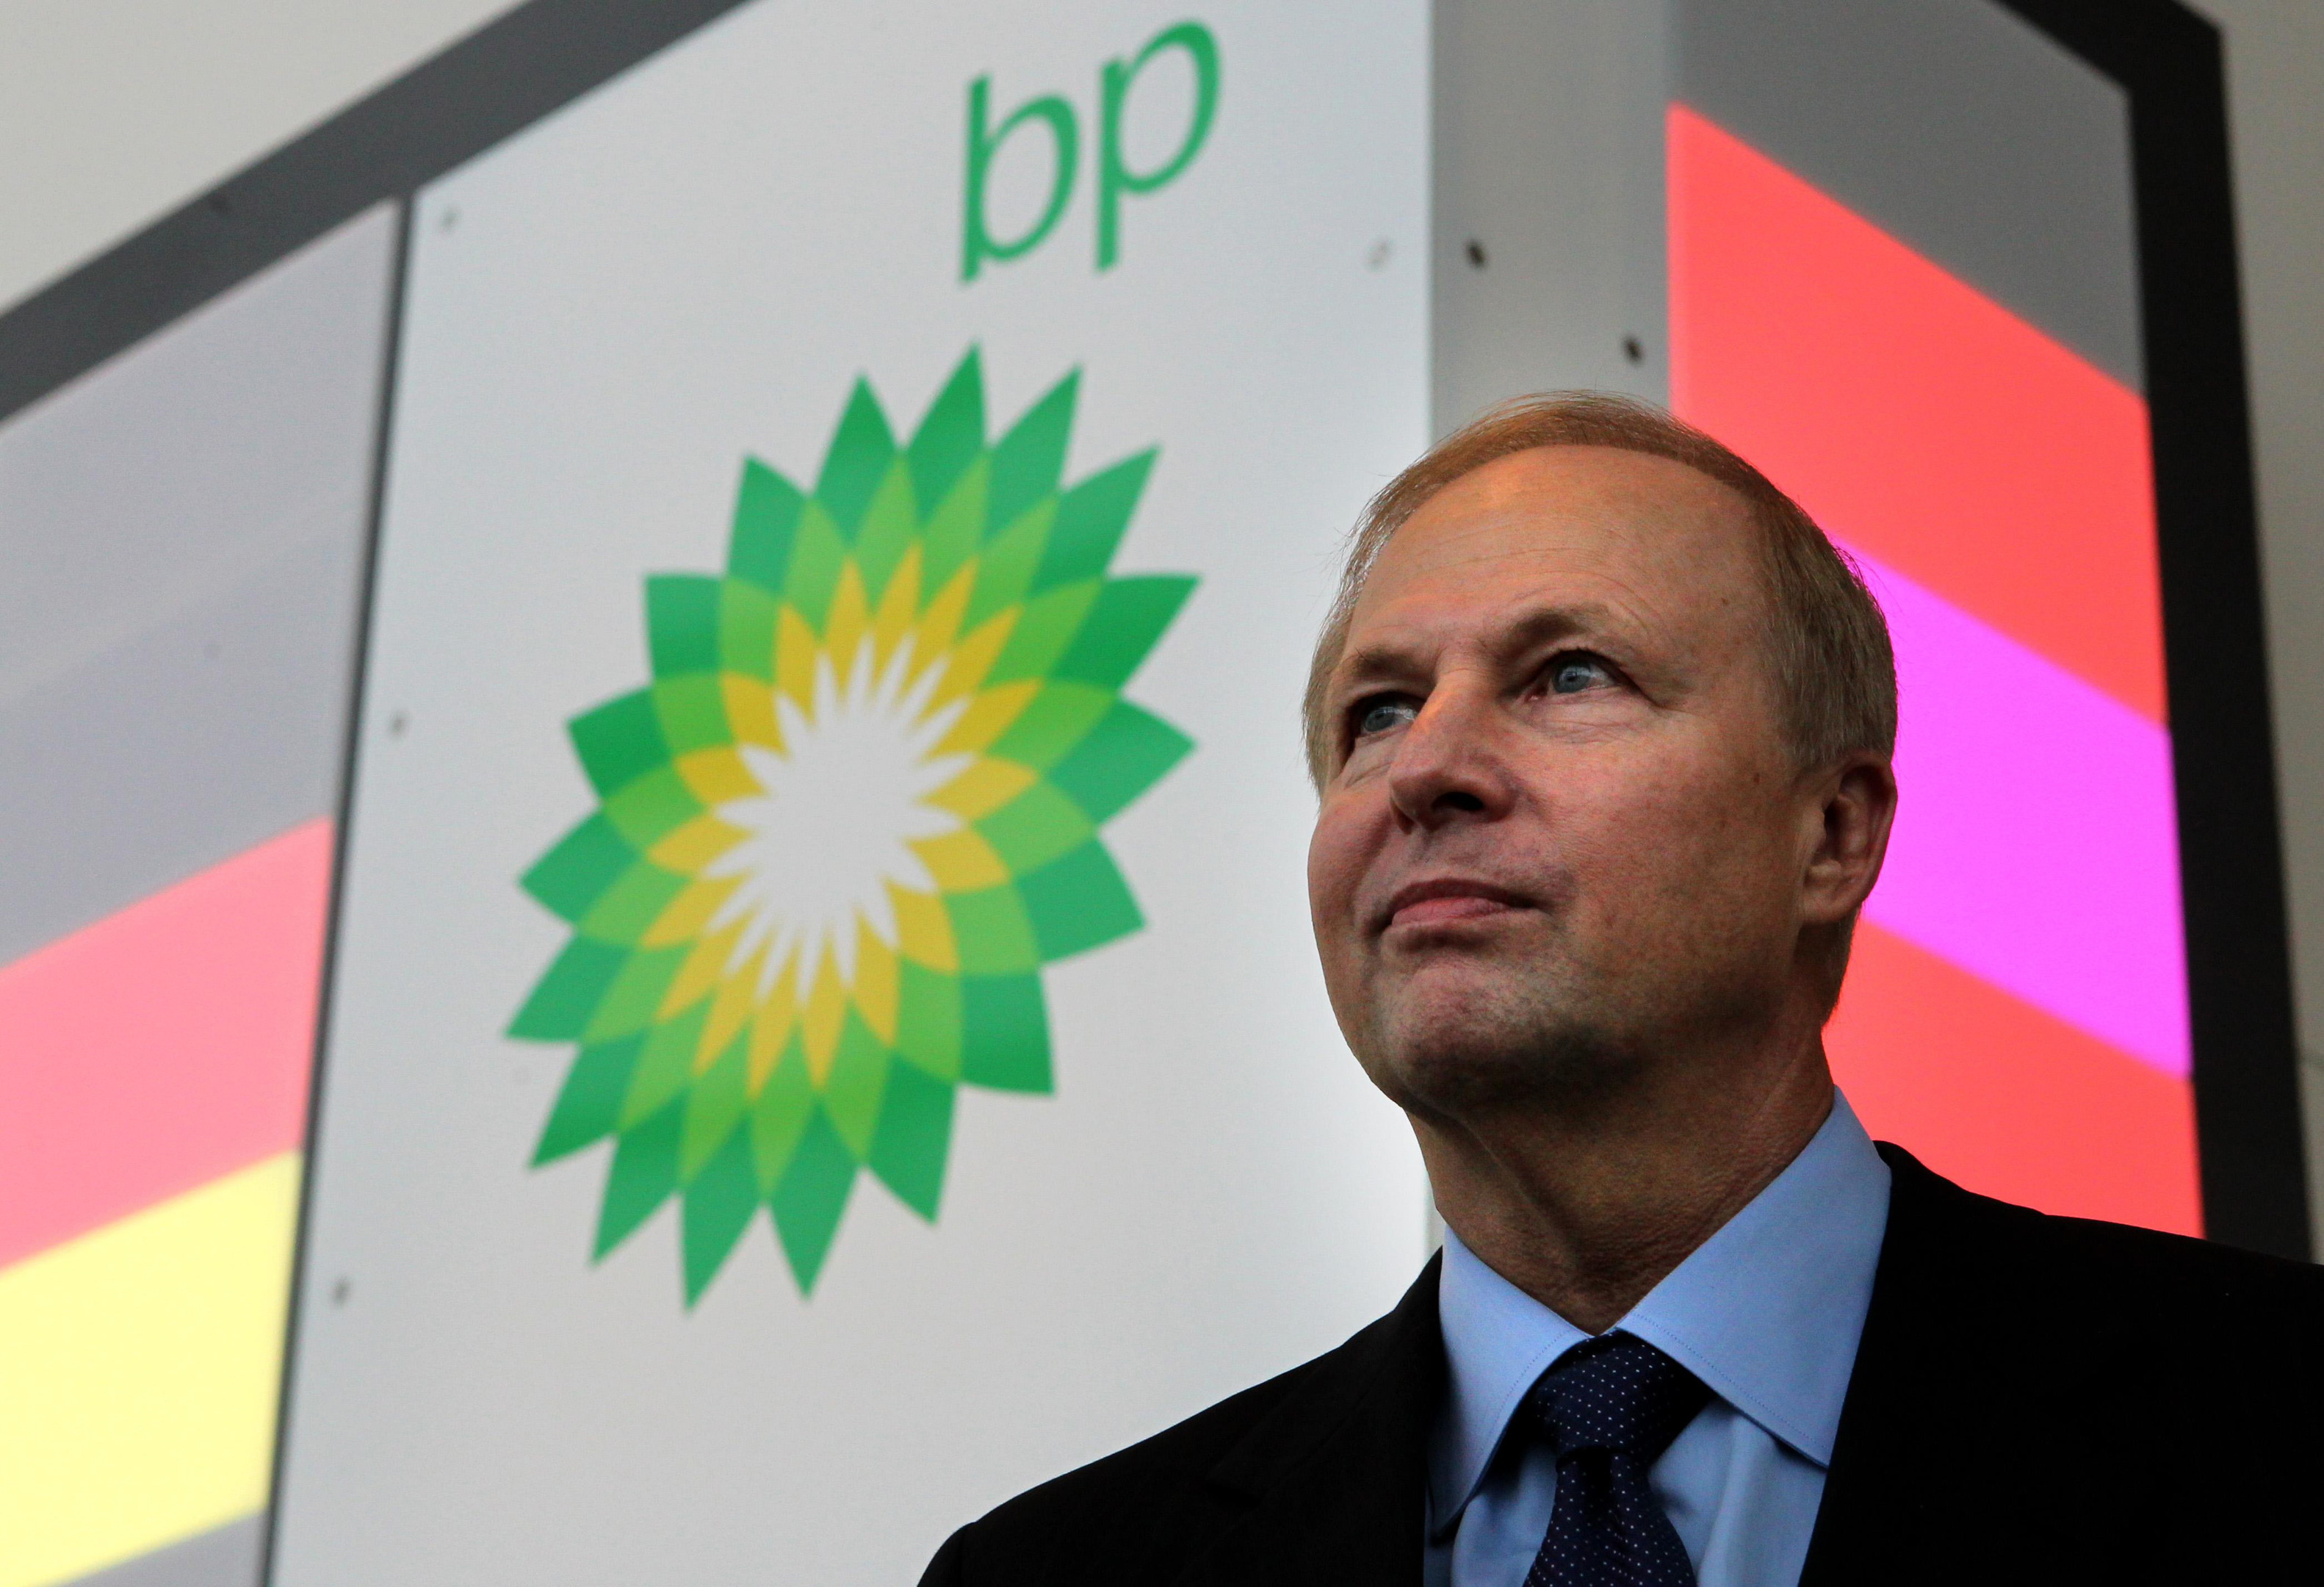 BP Chief Executive Bob Dudley (Andrew Milligan / PA Archive)